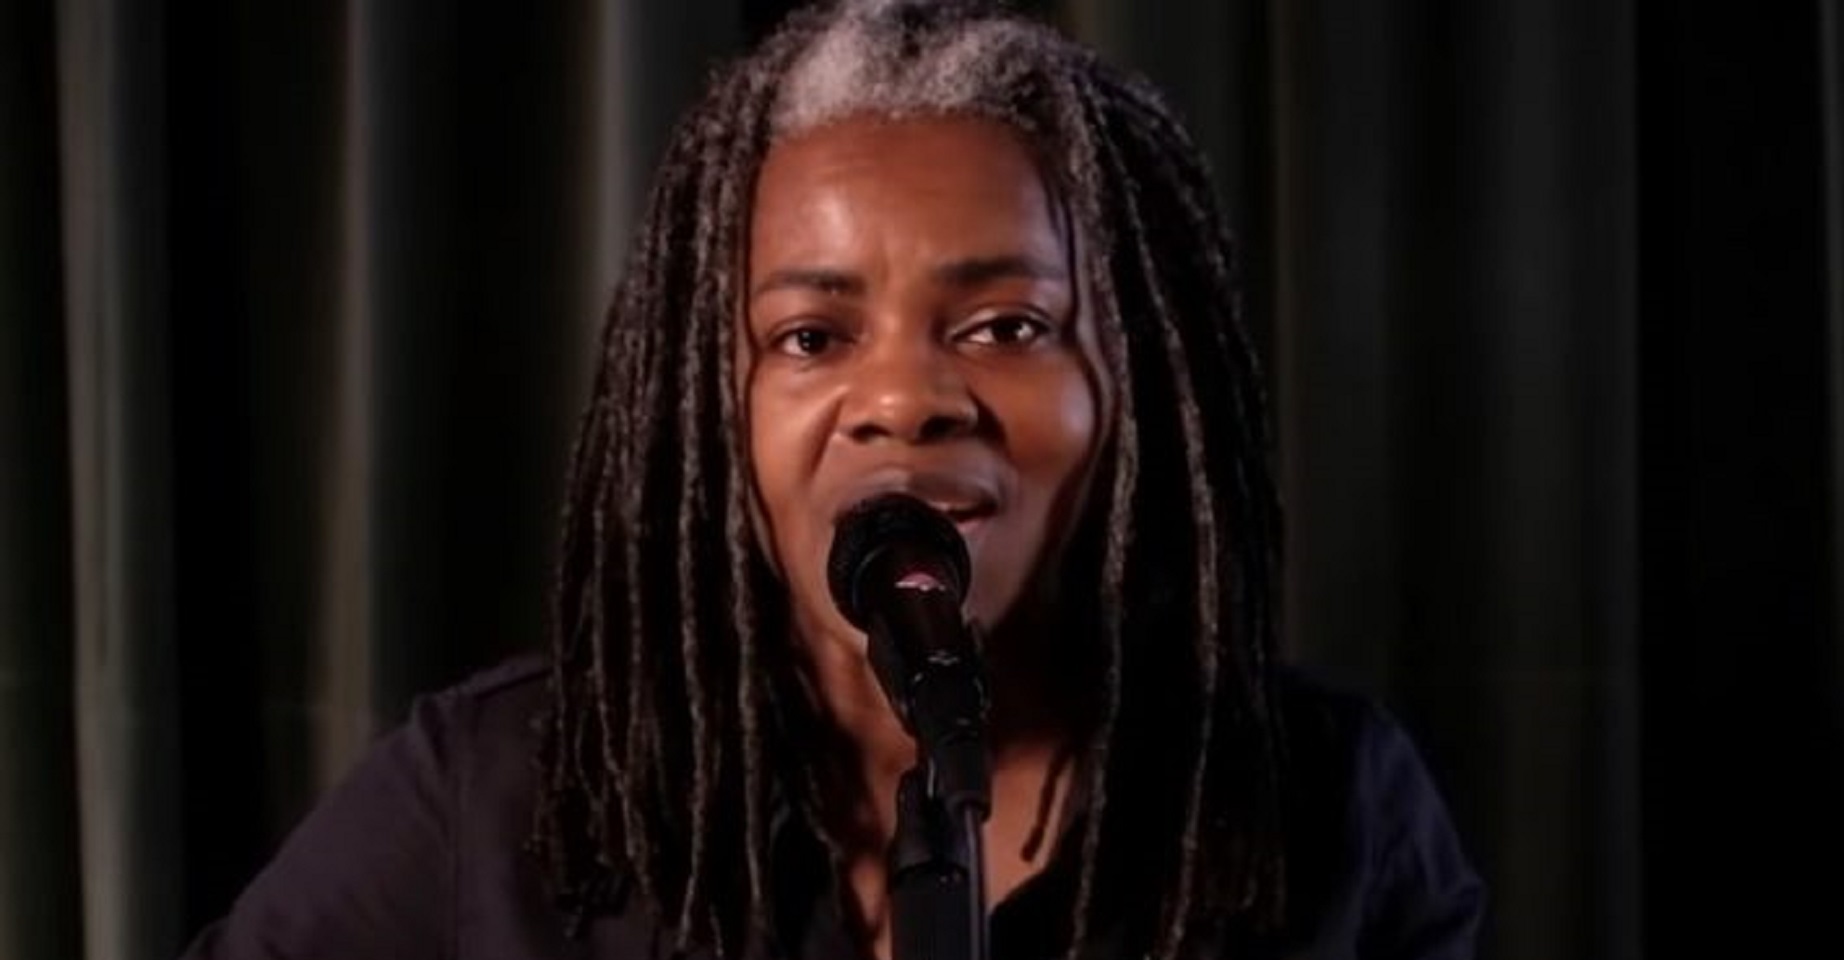 ‘Fast Car’ Singer Tracy Chapman Makes Rare TV Appearance, Watch Her Perform ‘Talkin’ ‘Bout a Revolution’